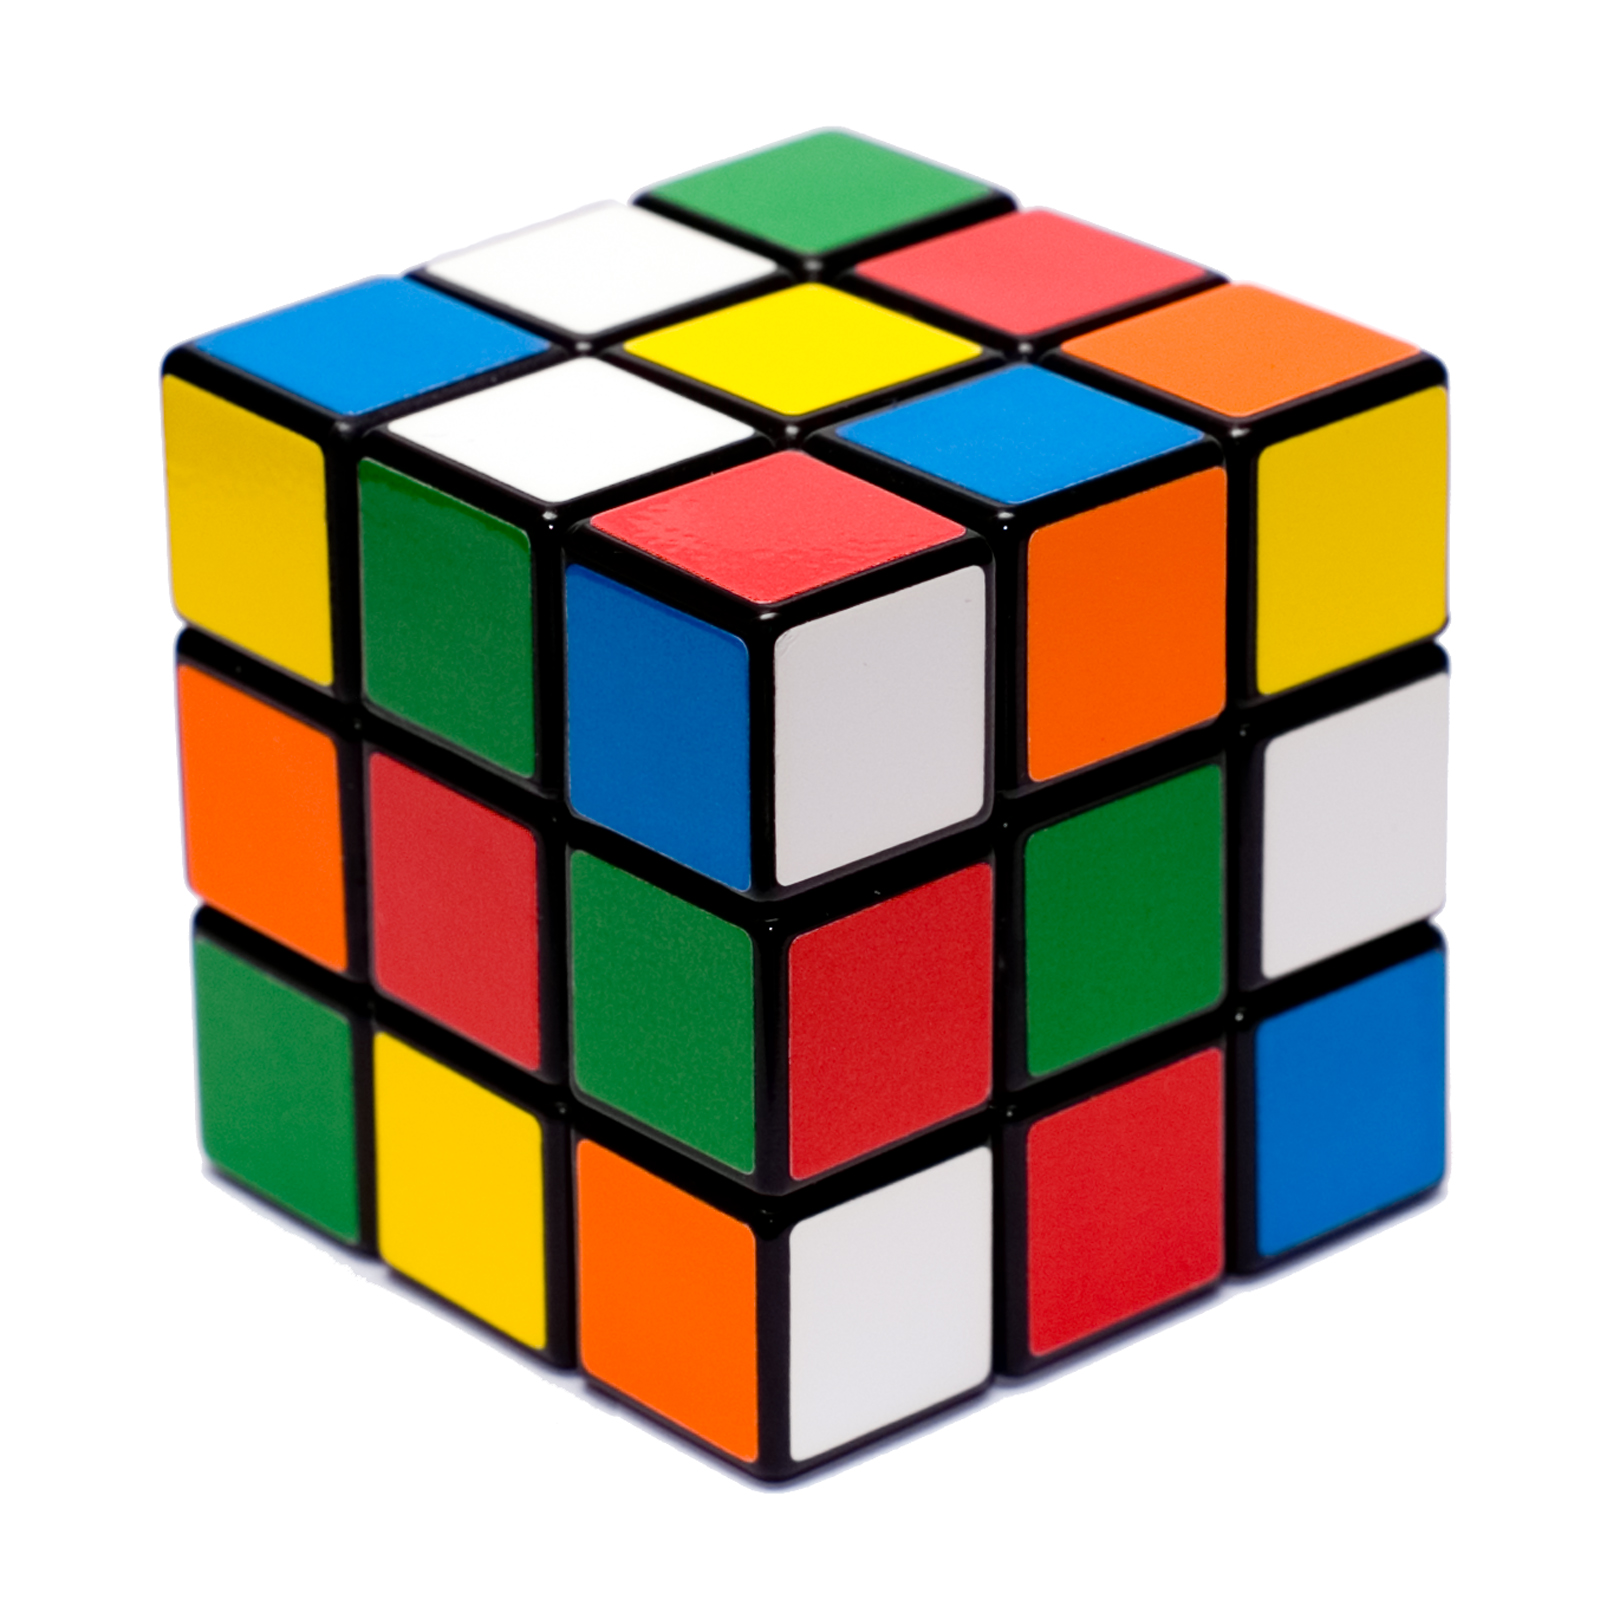 Iraq and Afghanistan Are Not Rubik's Cubes | The Contrary Perspective